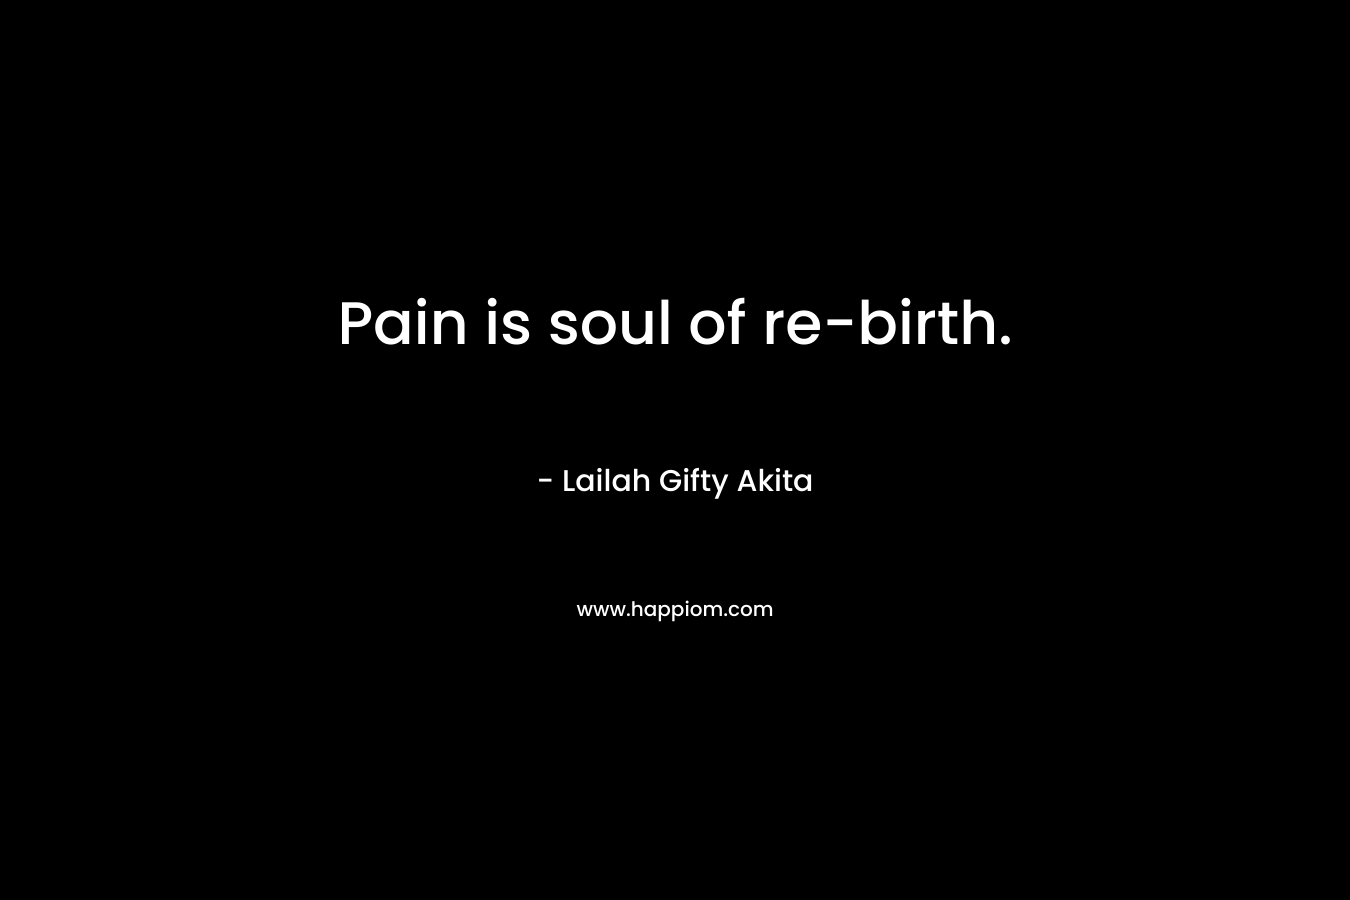 Pain is soul of re-birth.